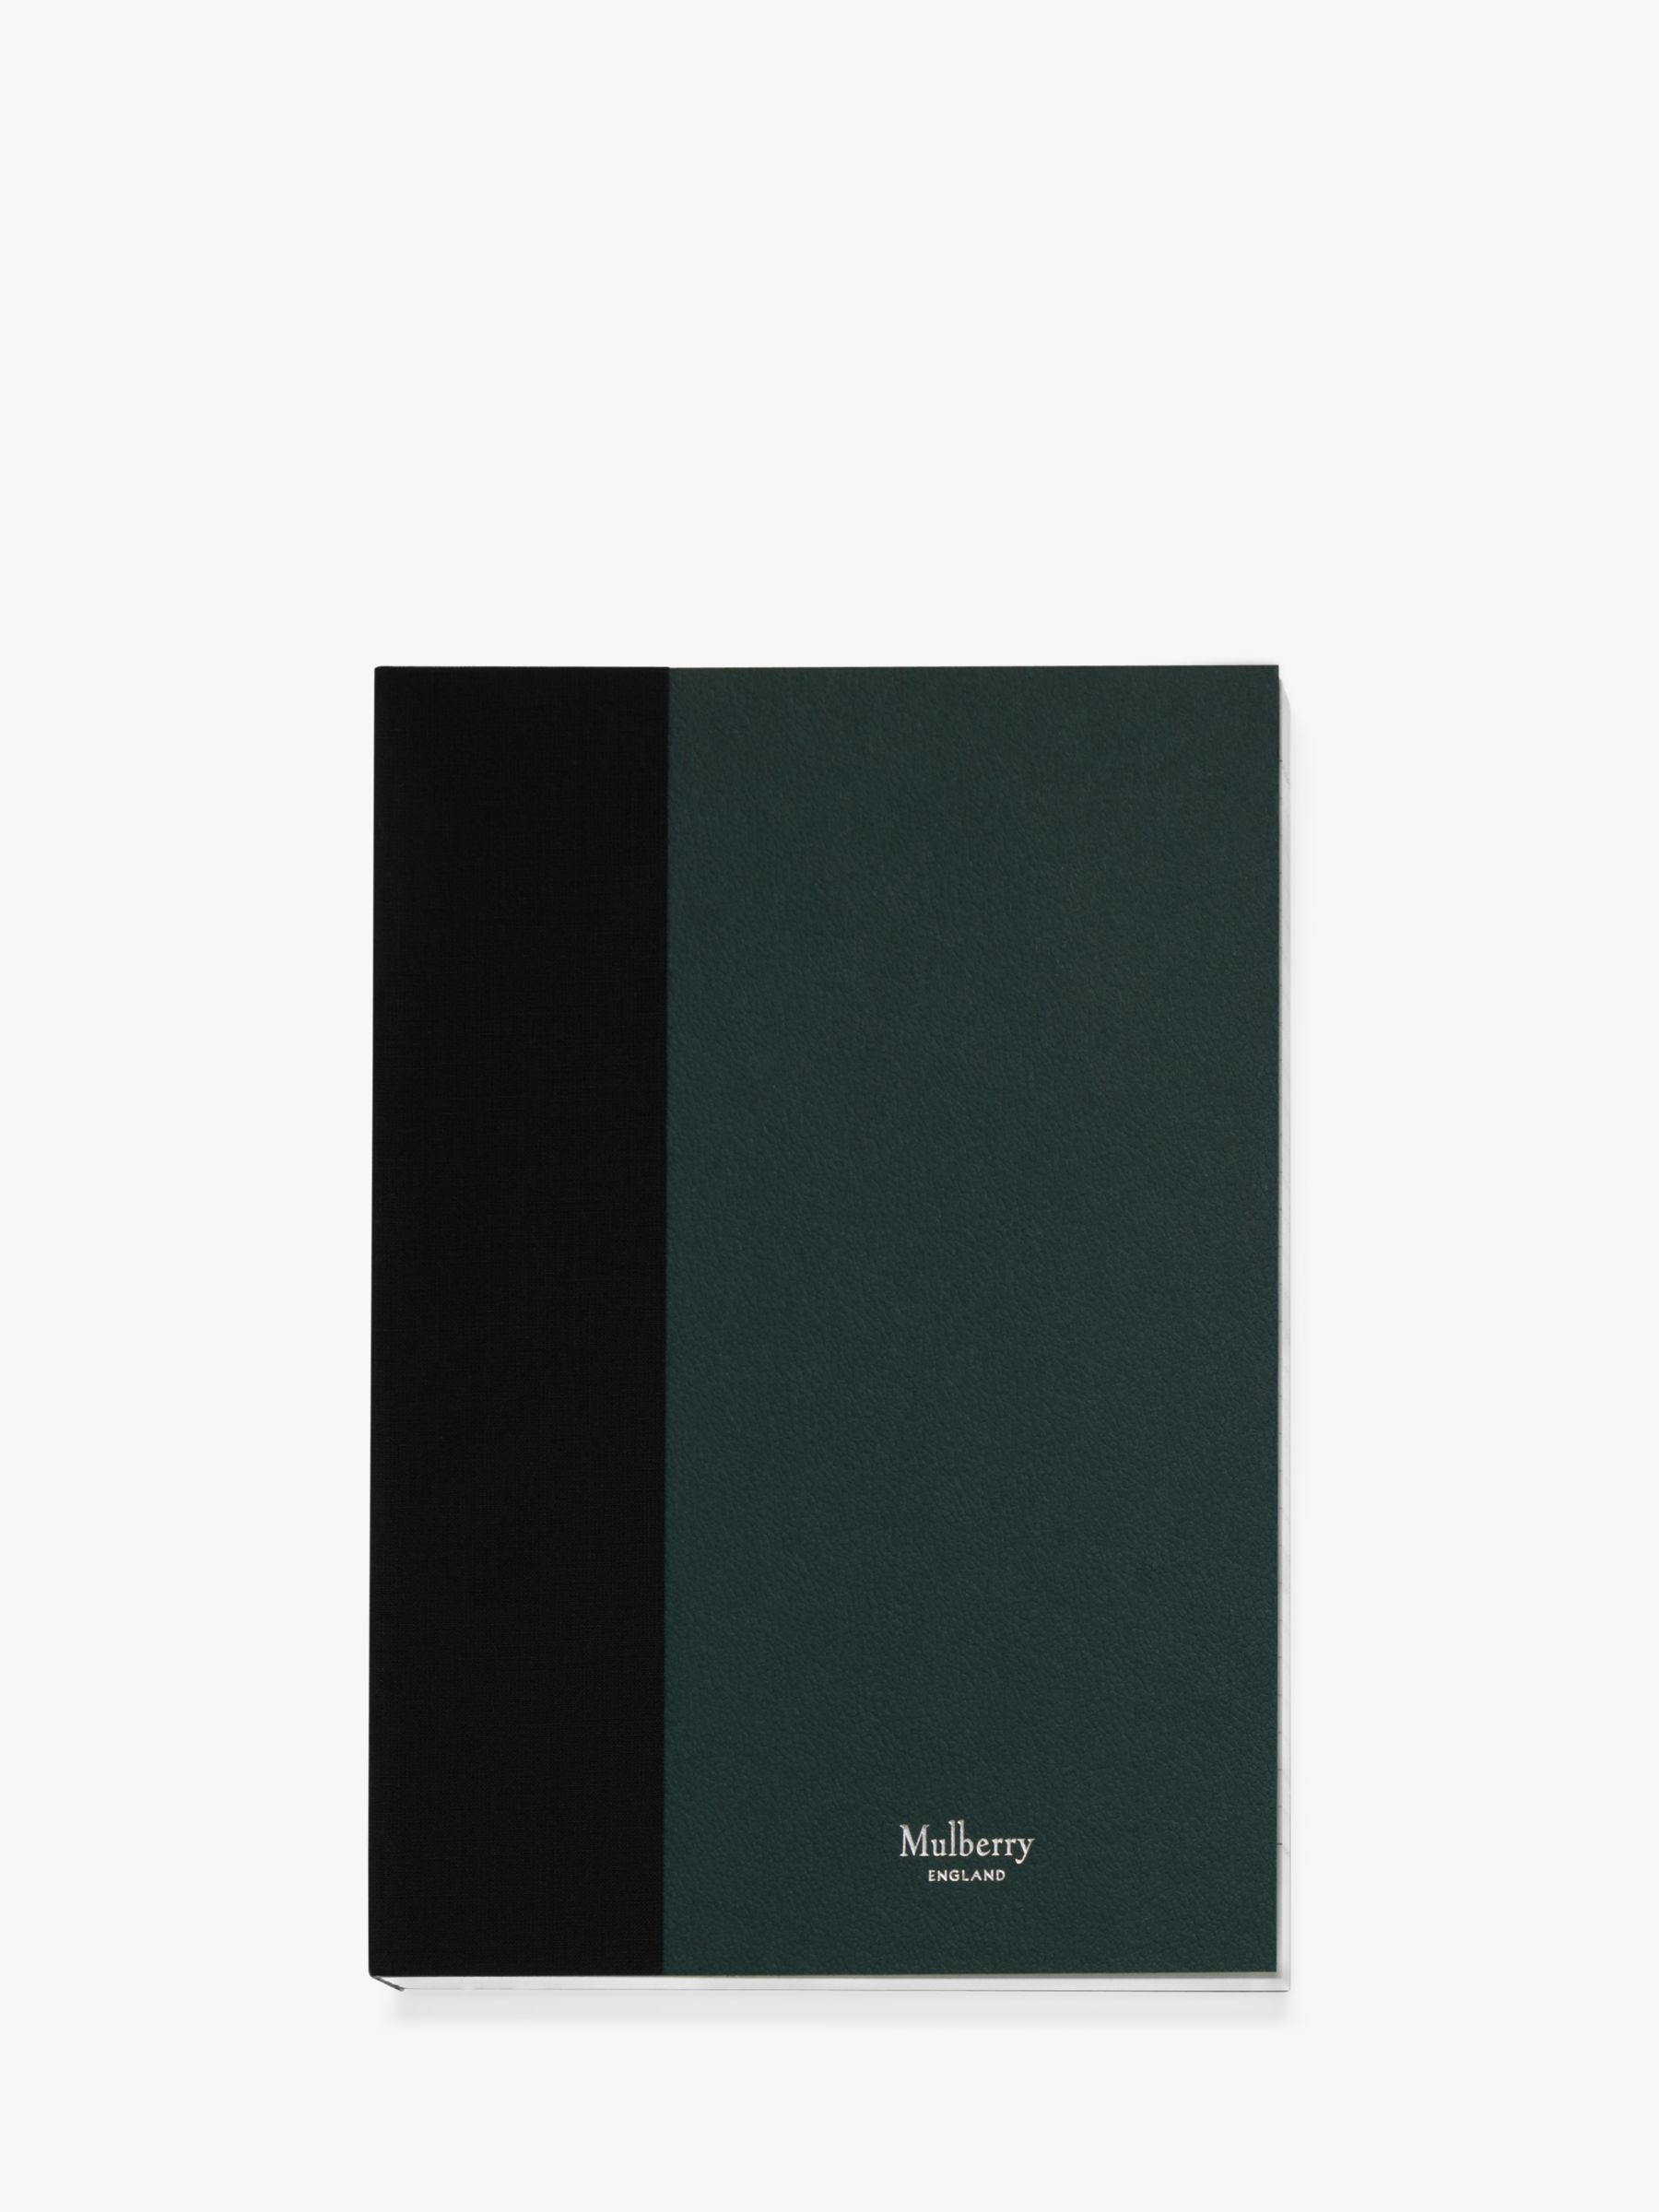 Mulberry A5 Notebook, White Paper